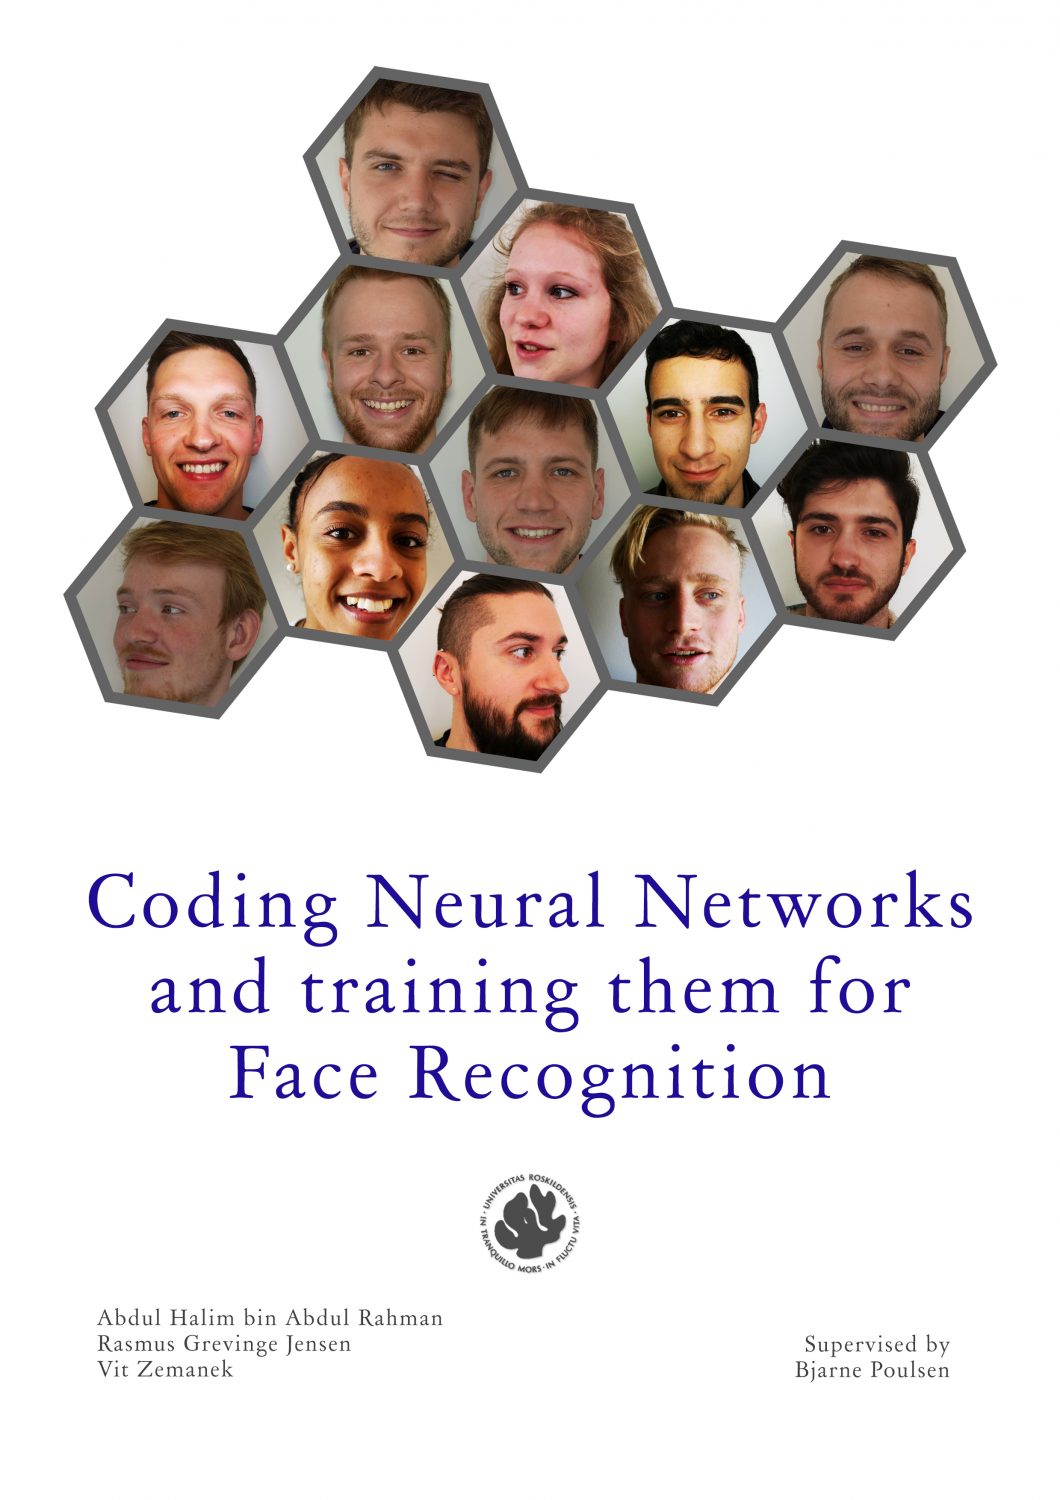 Neural Networks and Face Recognition